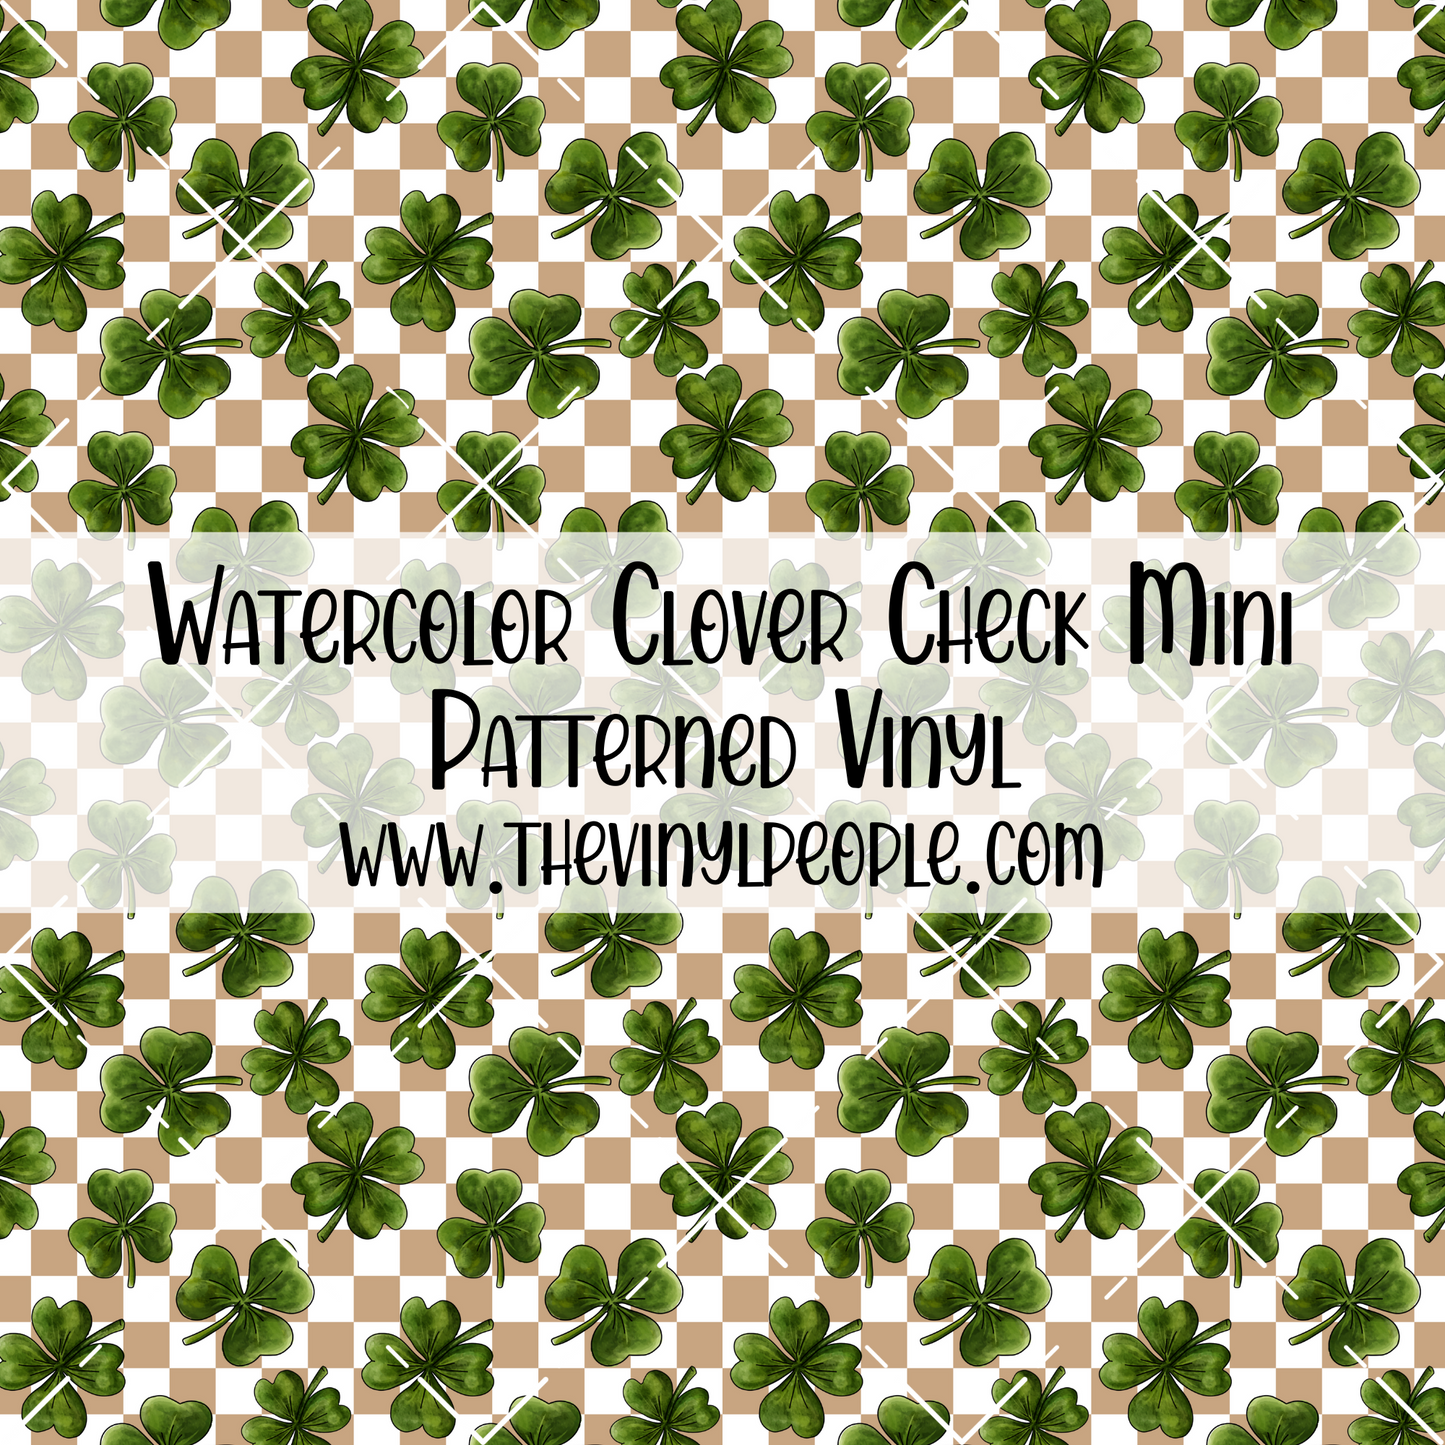 Watercolor Clover Check Patterned Vinyl